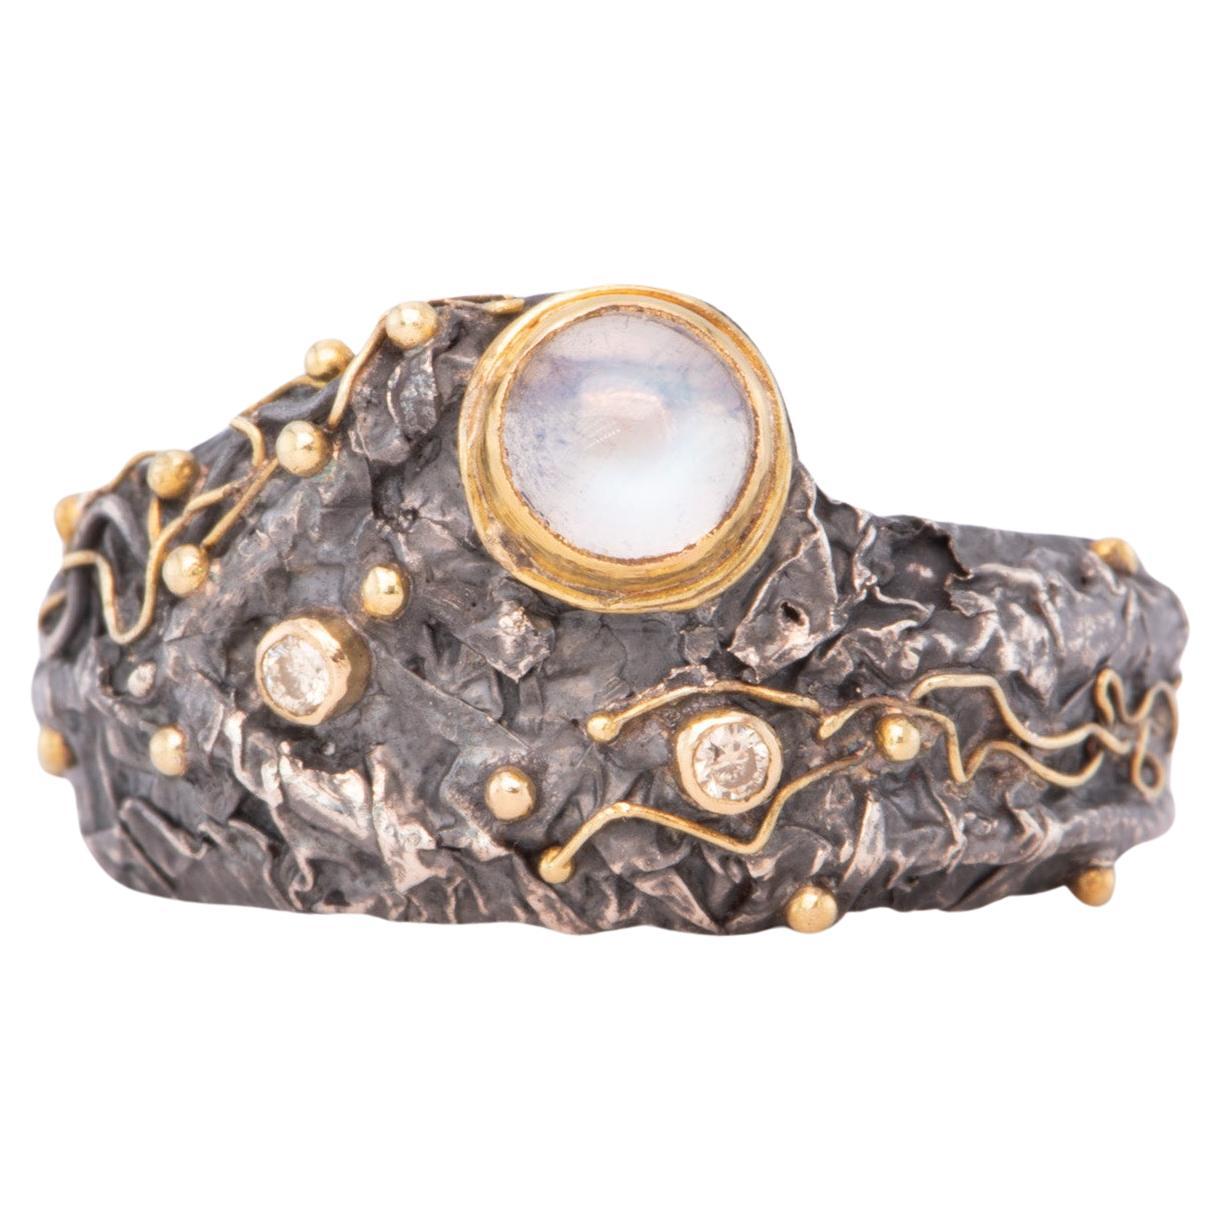 Unique Textured Wide Band Ring Moonstone Diamonds Sterling Silver 18K Gold R6645